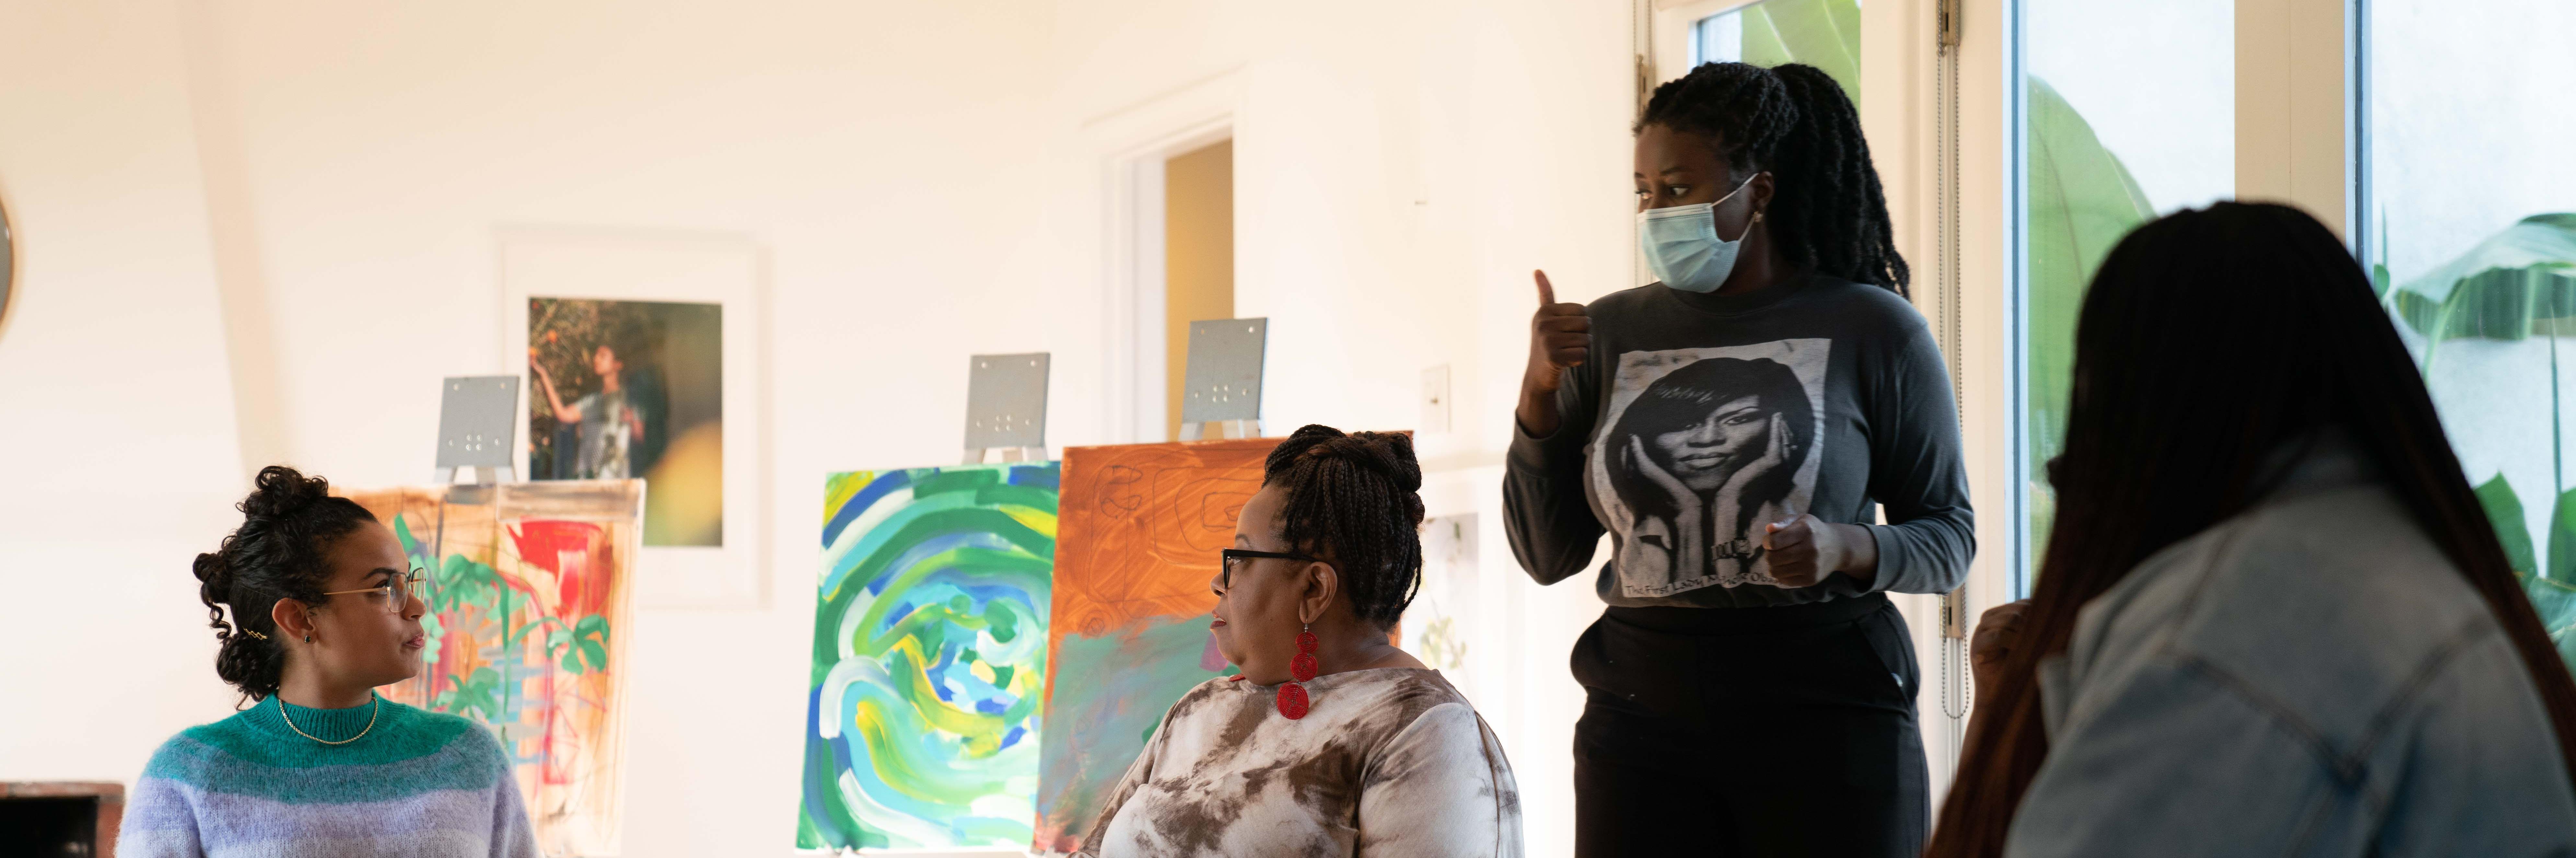 Nana on the set of her film Healing in Colour with three women in the film surrounded by paint canvasses